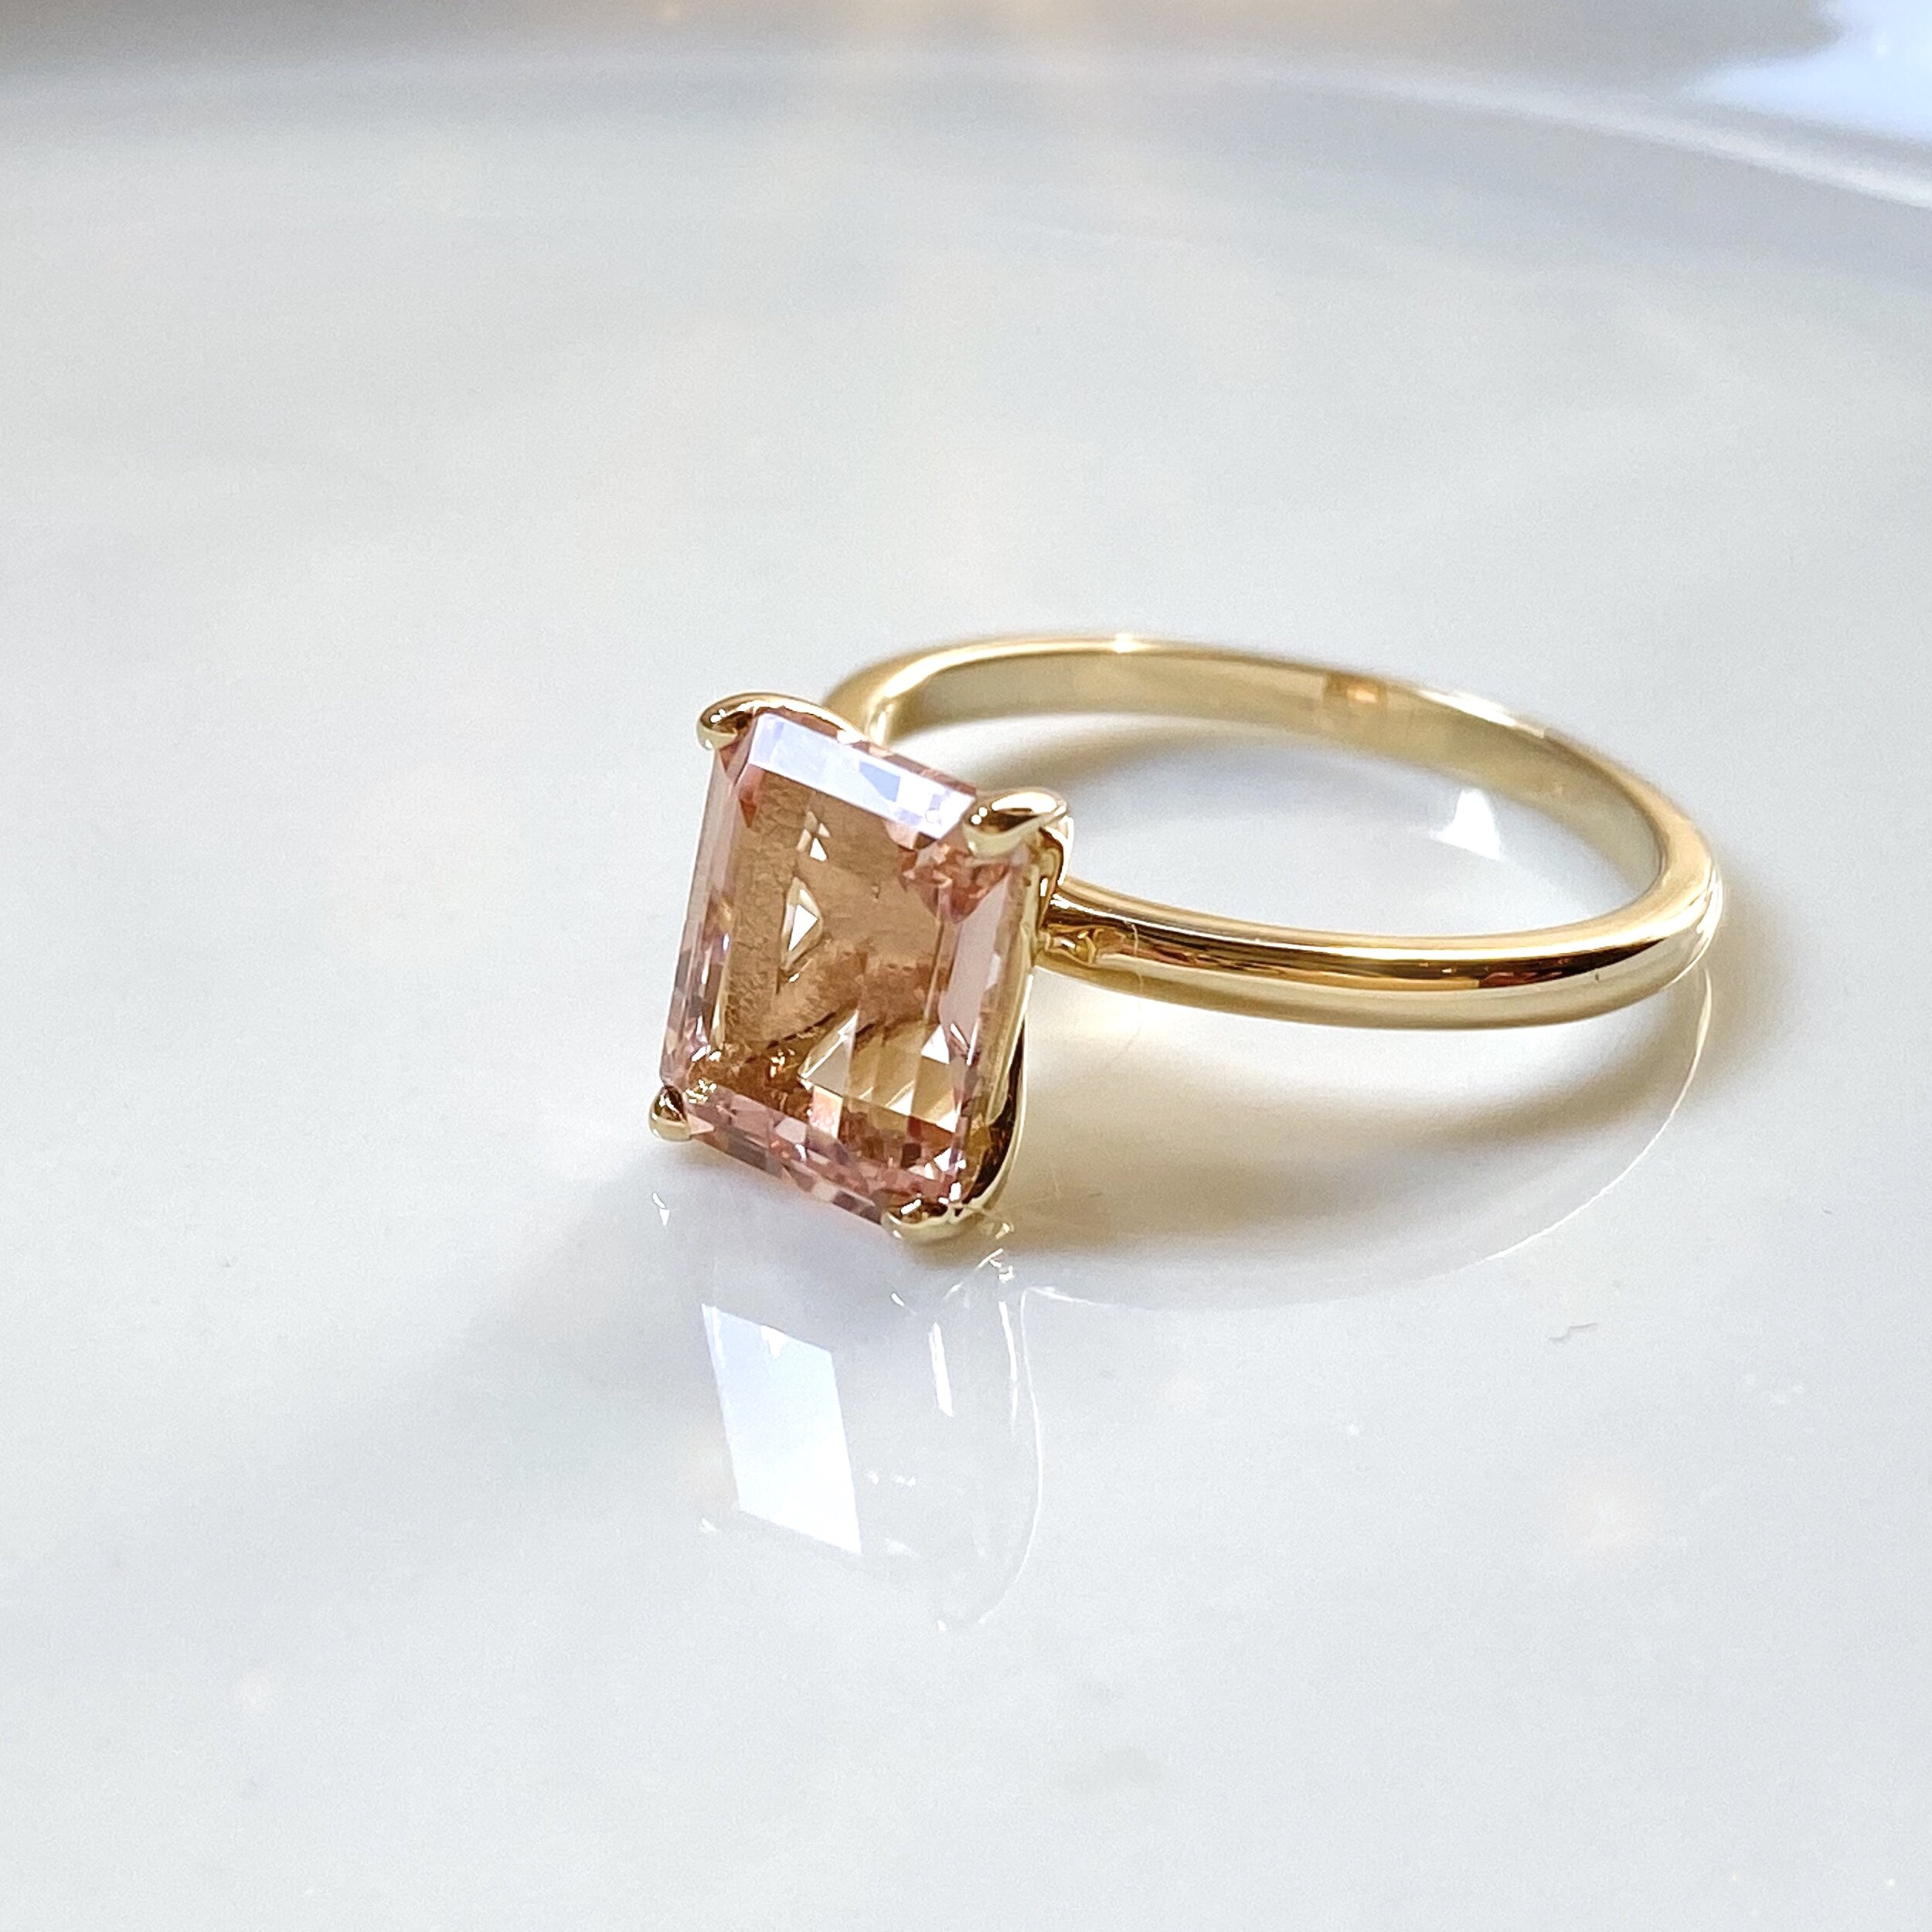 14k yellow gold ring with morganite